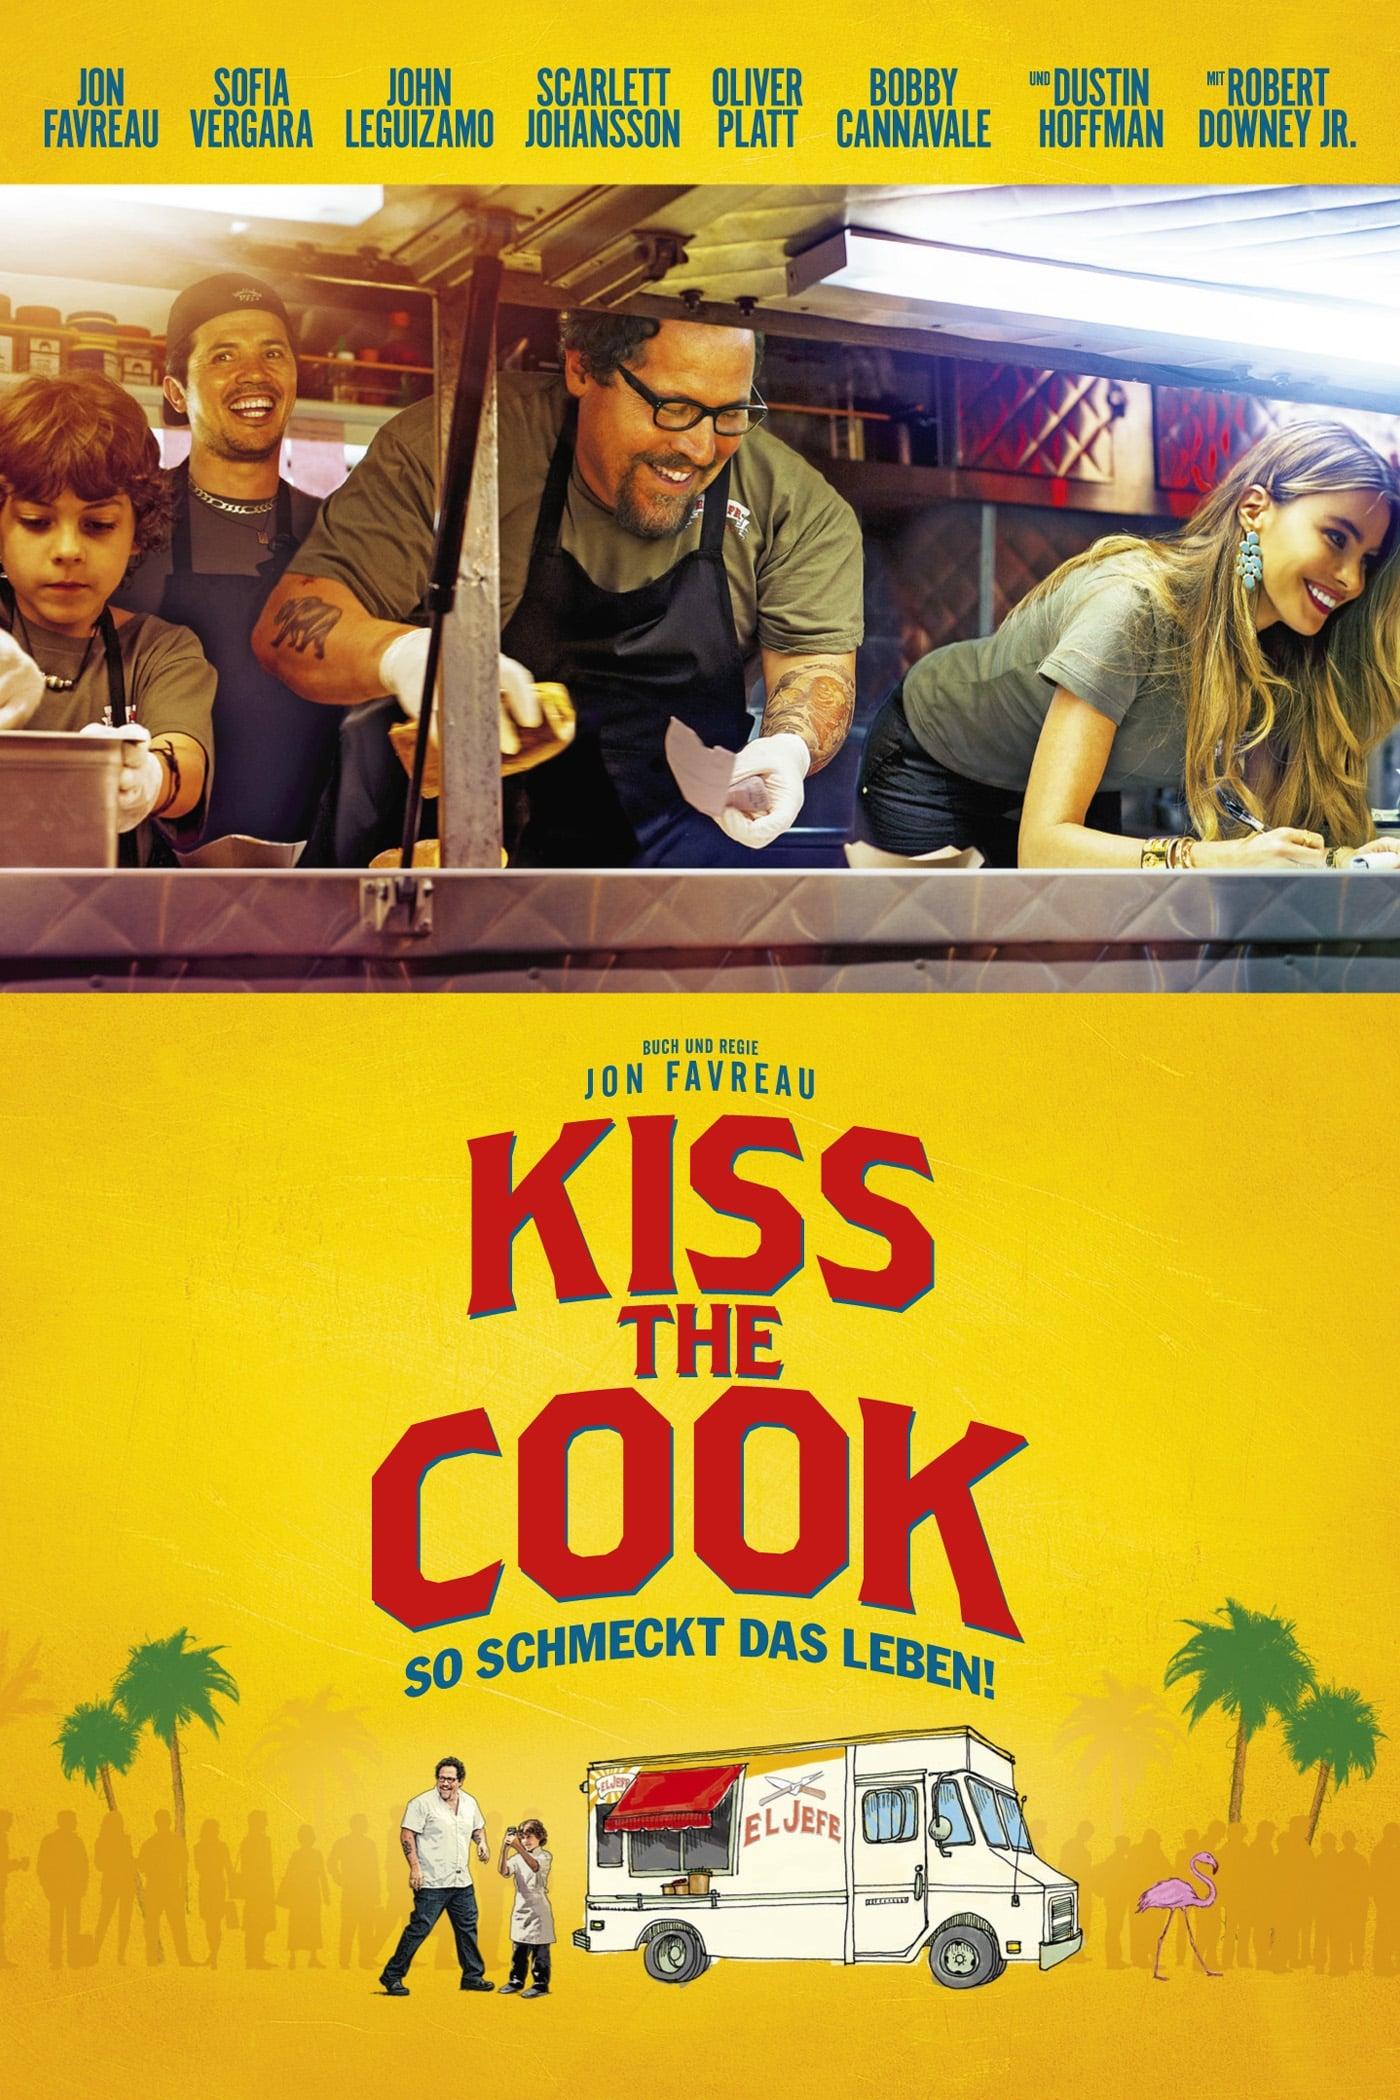 Kiss the Cook poster